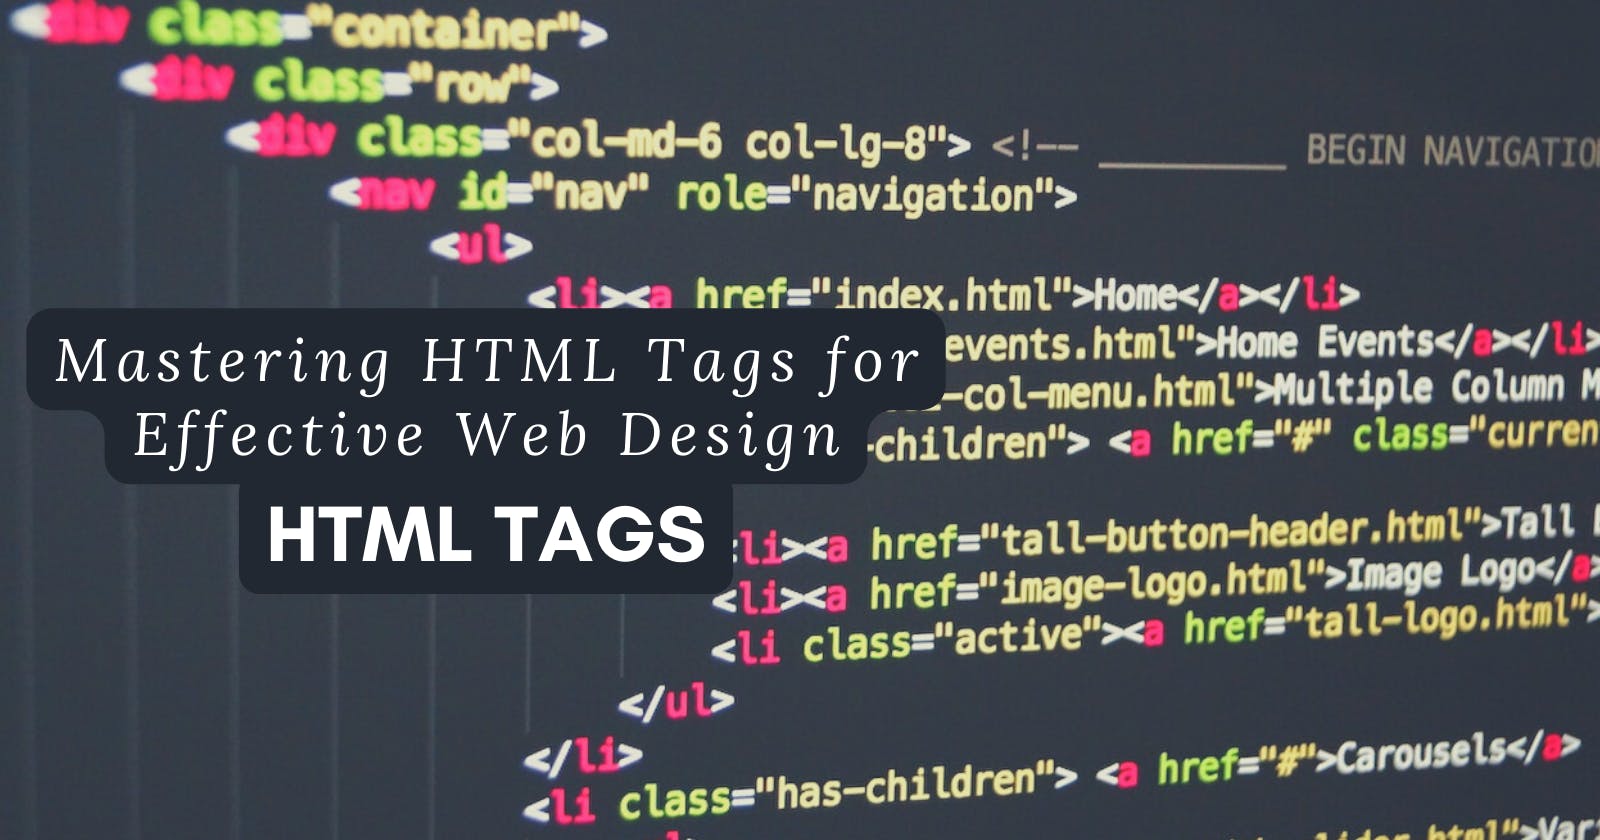 Mastering HTML Tags for Effective Web Design